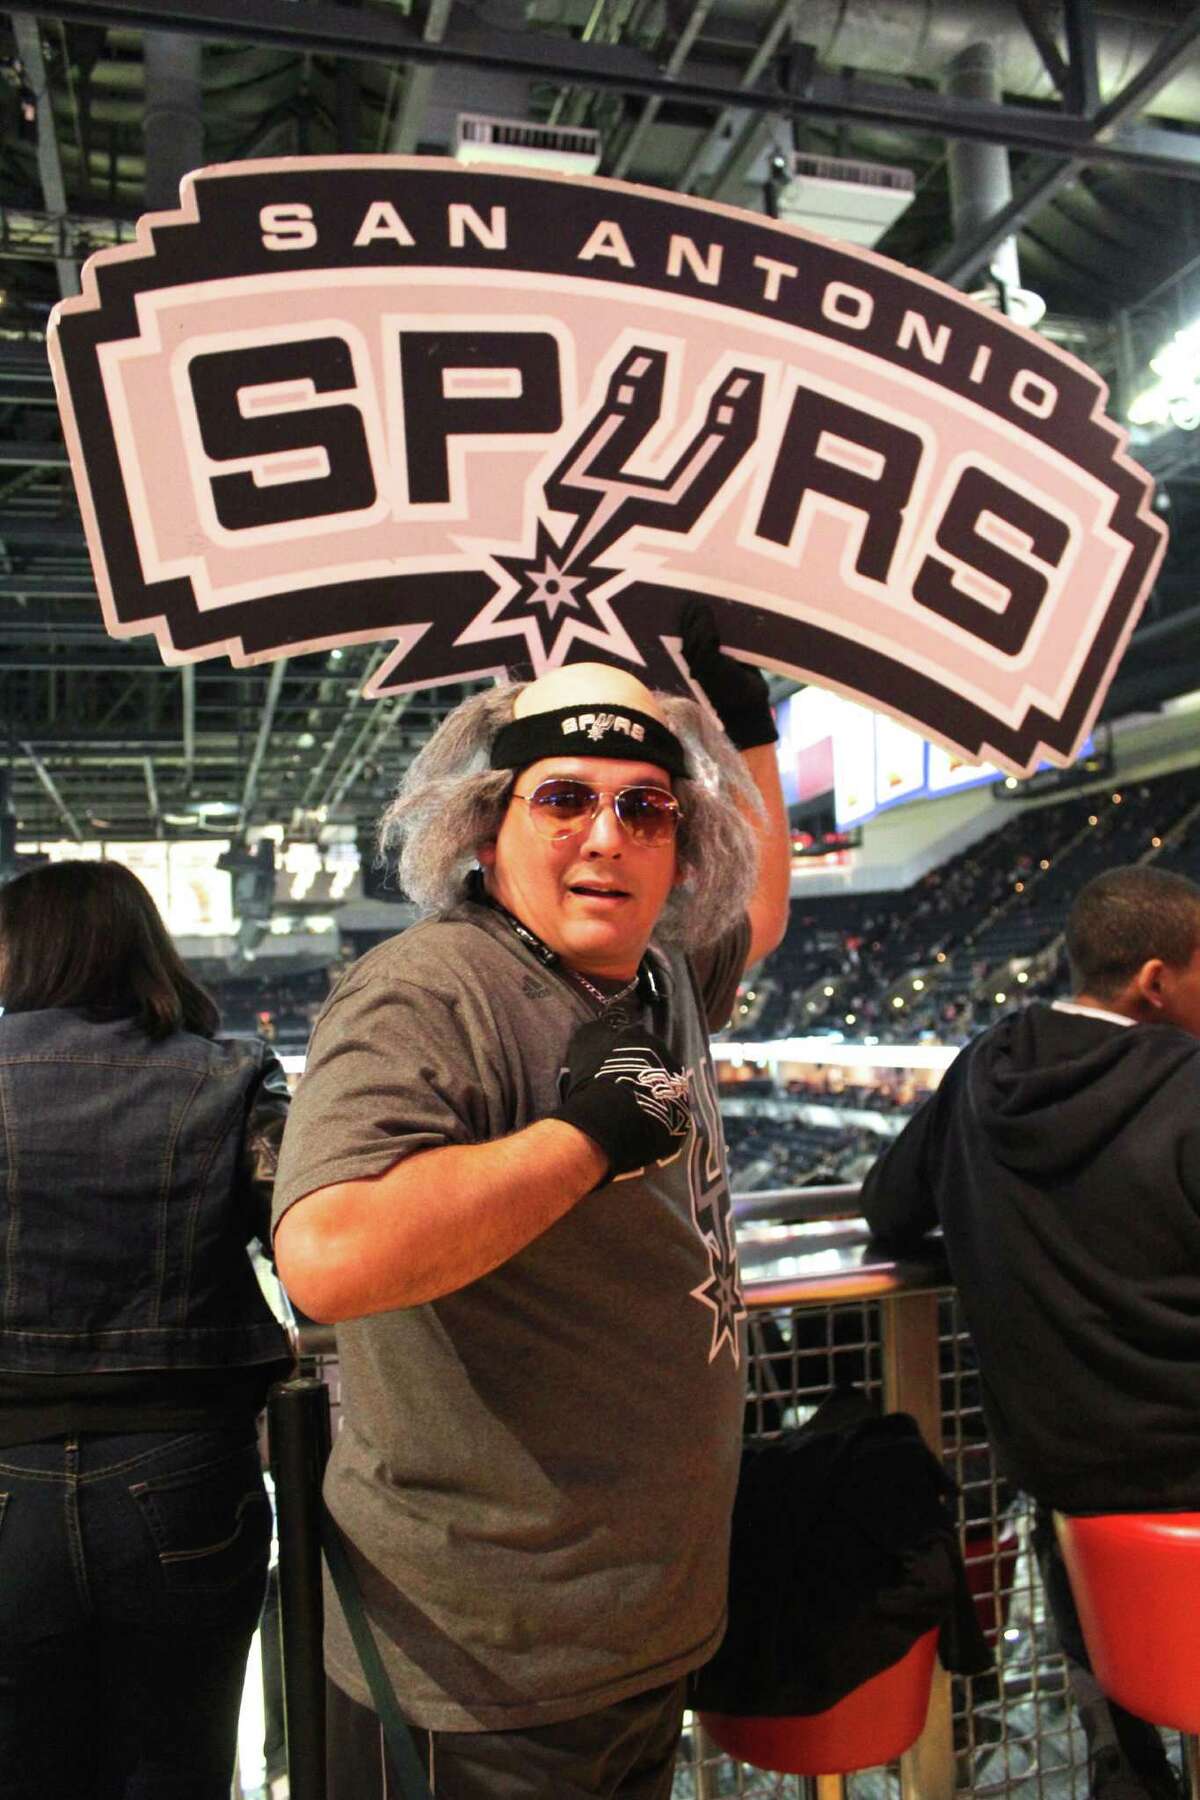 mySpy spotted these Spurs fans at the Spurs vs. Kings game on March 4, 2015.